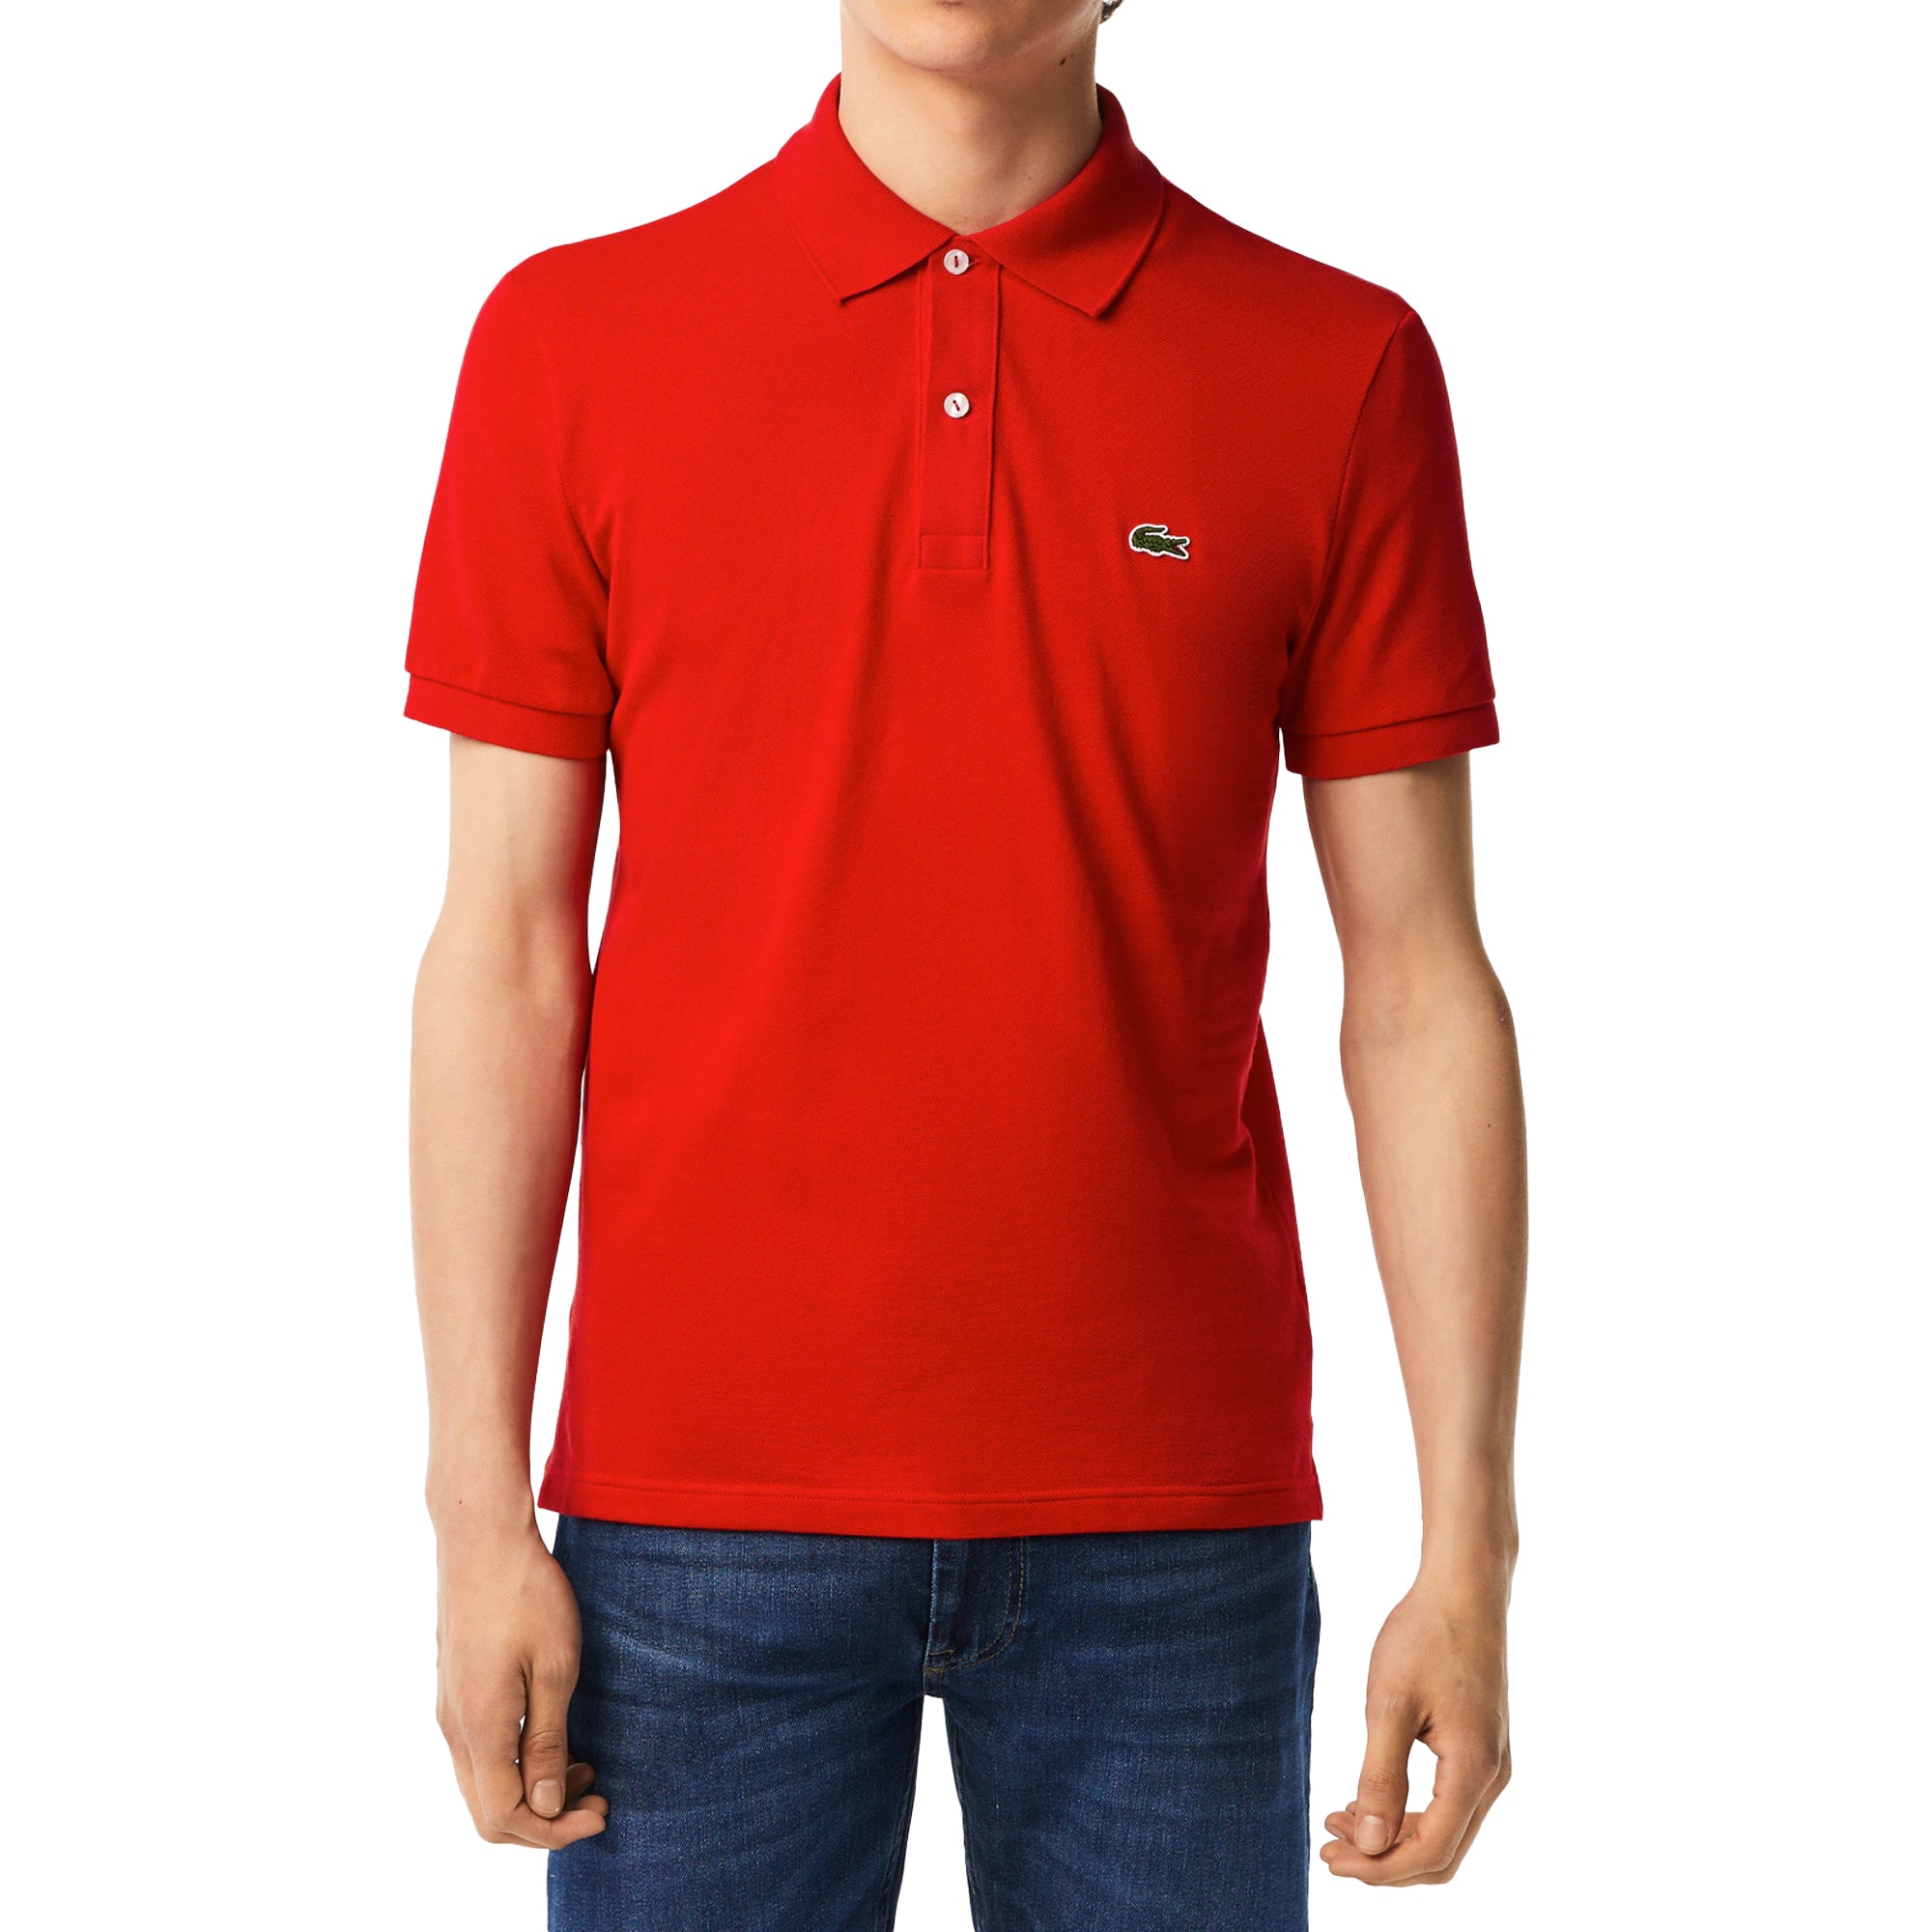 Lacoste Short Sleeved Slim Fit Polo PH4012 - Bright Red